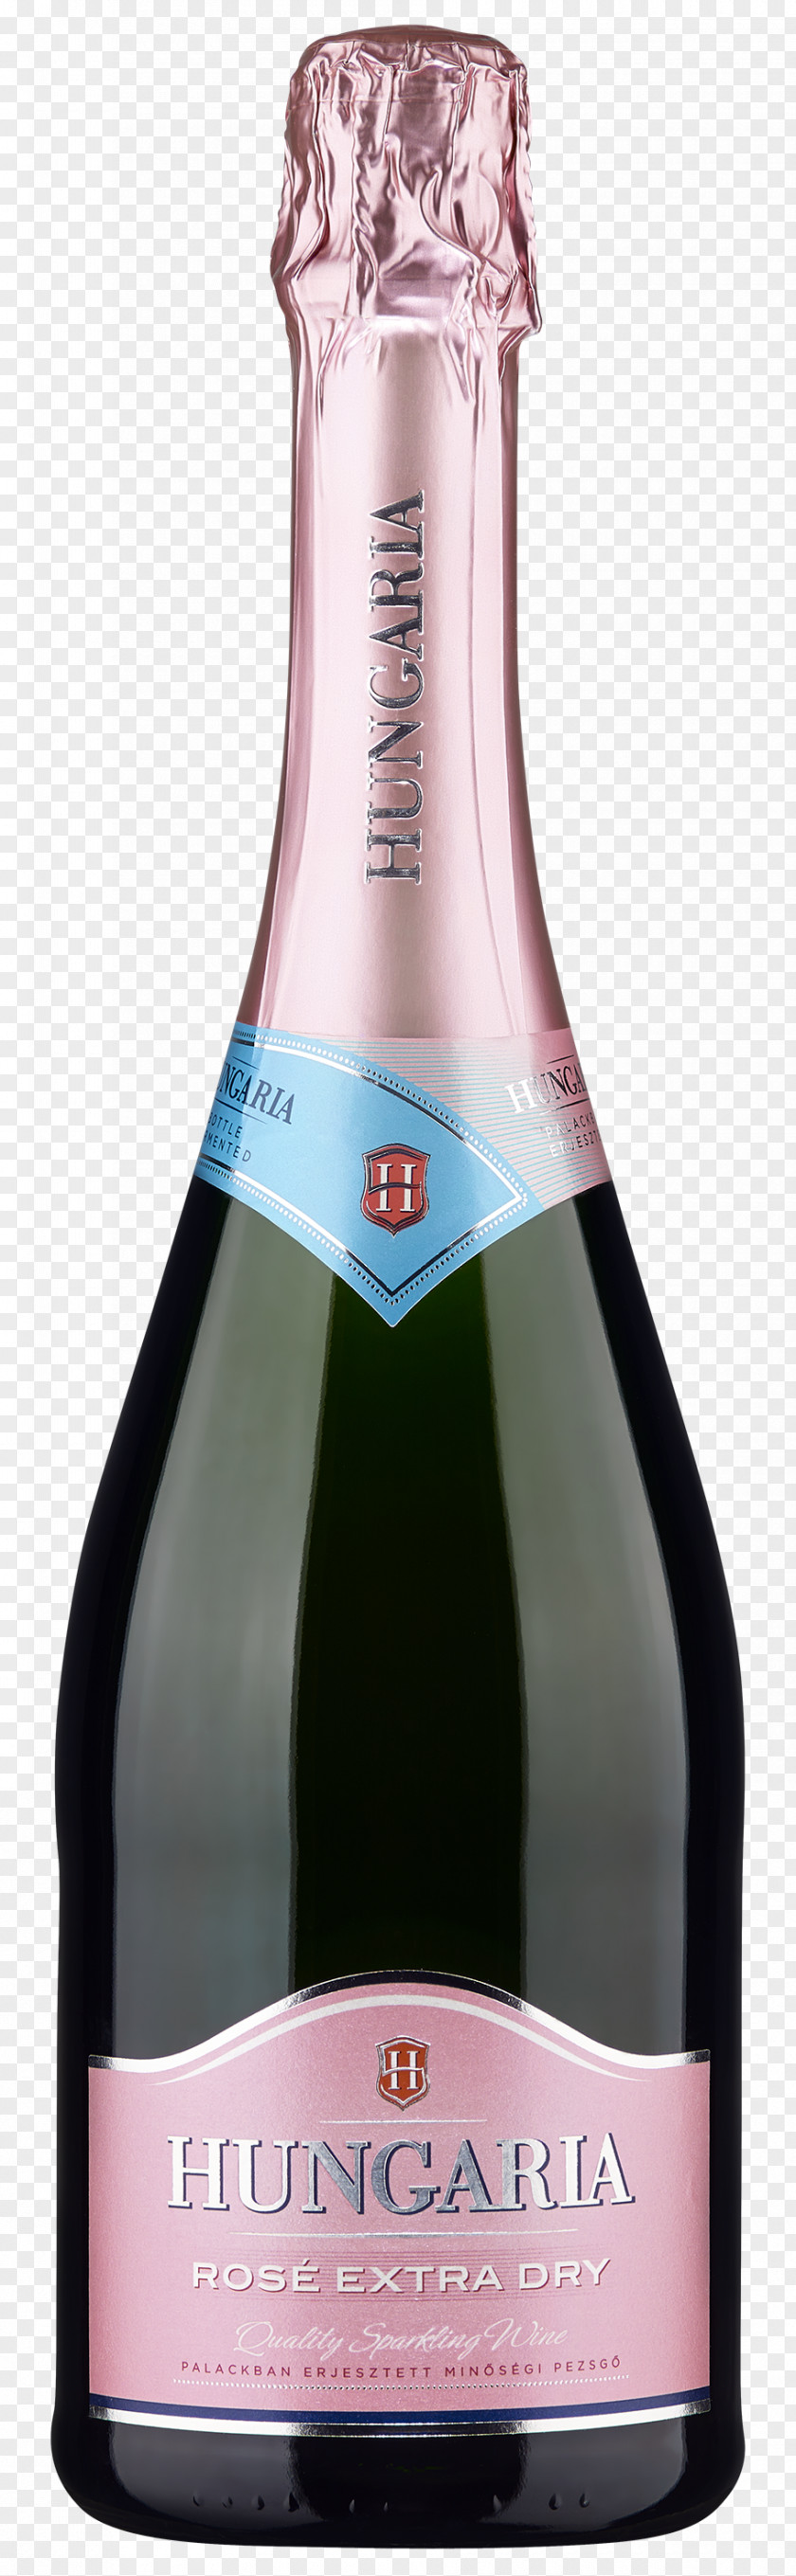 Champagne Sparkling Wine Rosé Hungary PNG